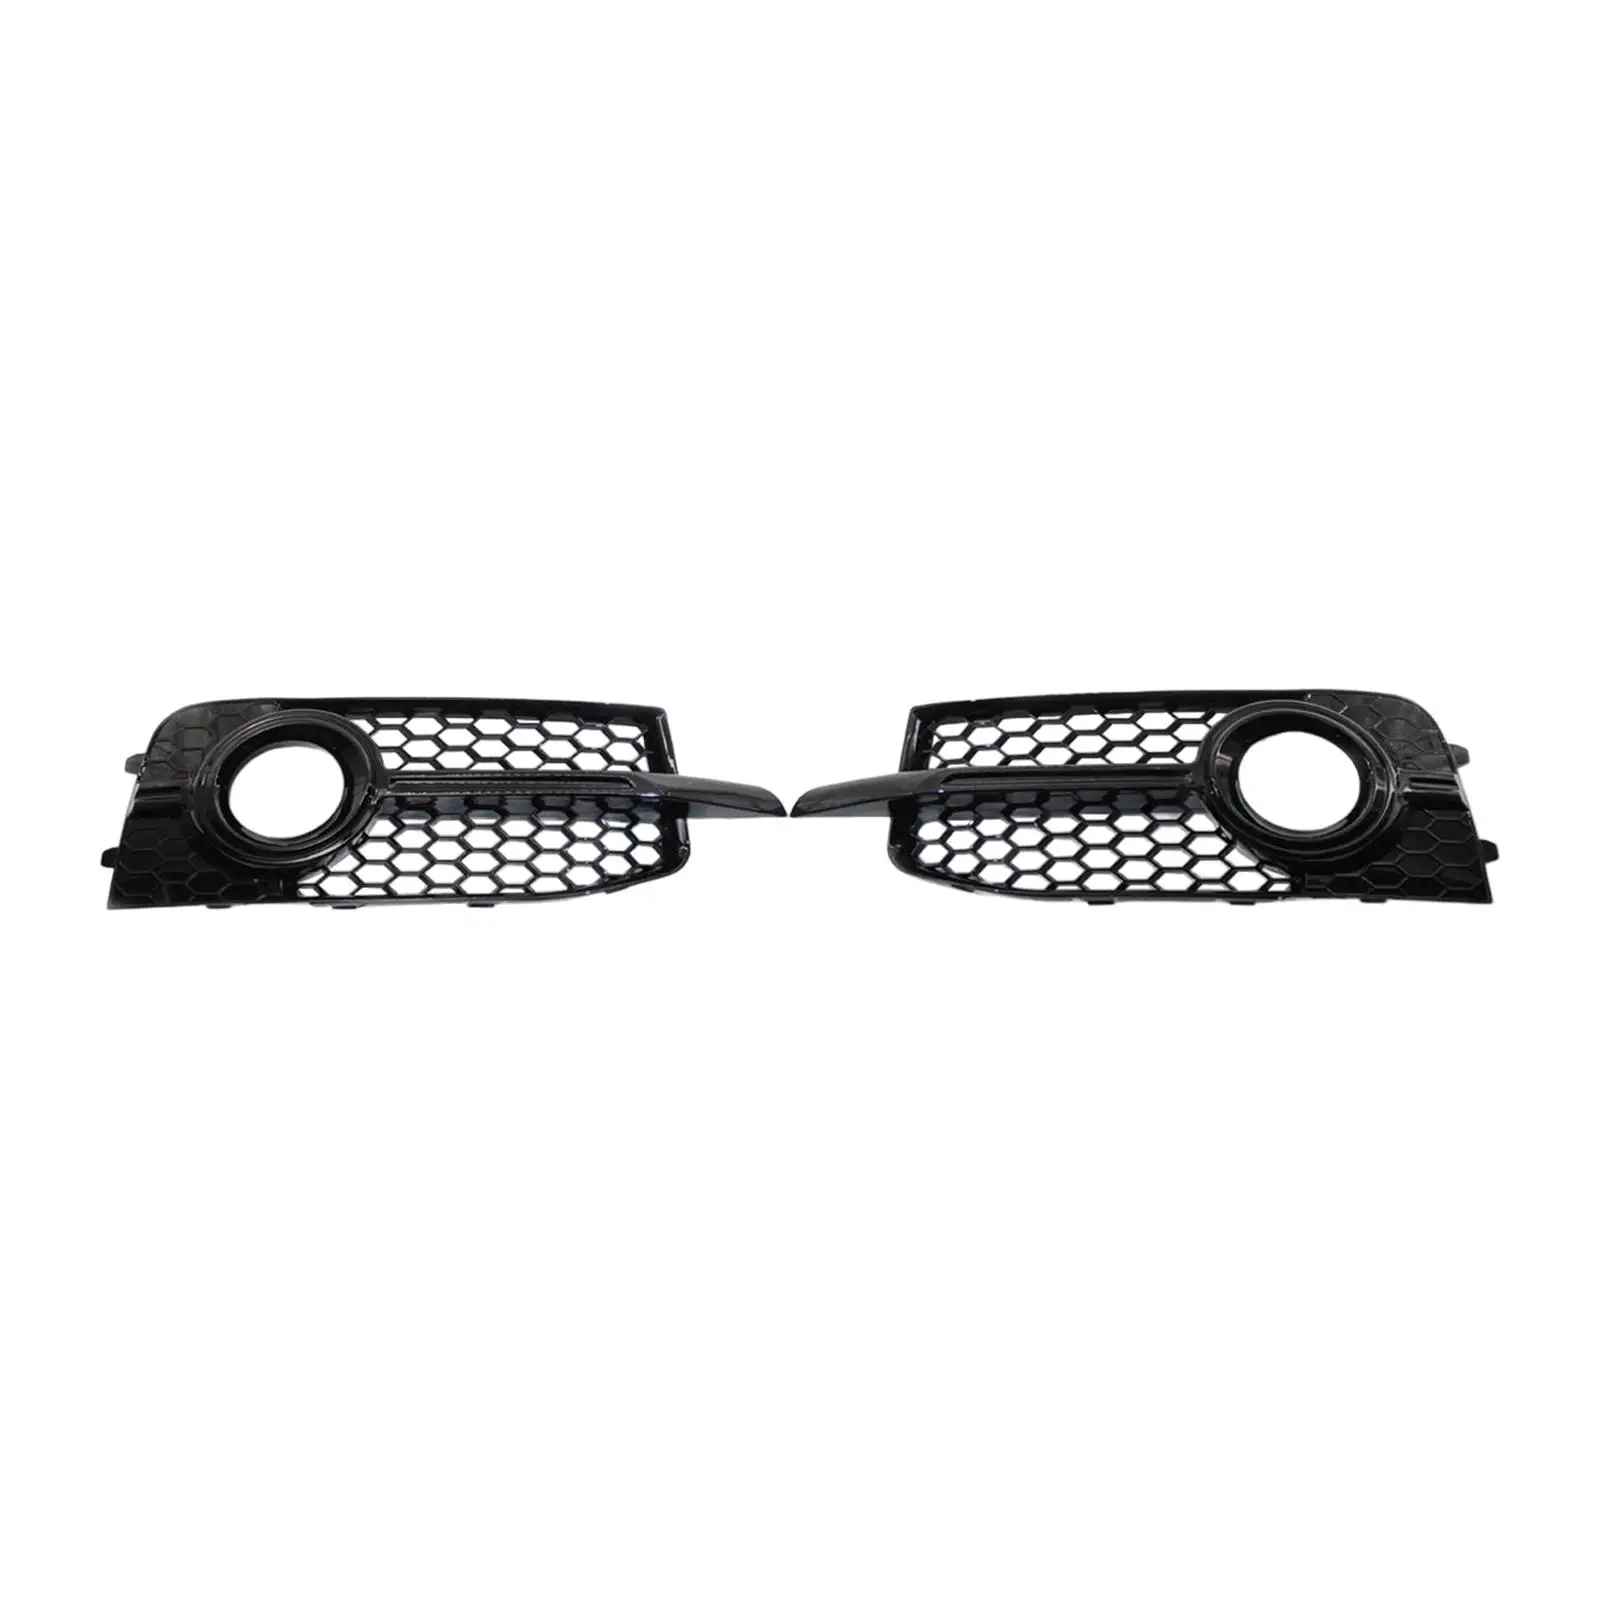 8x0807681B Premium Replacement Front Fog Light Grille Cover for Audi A1 2010-2014